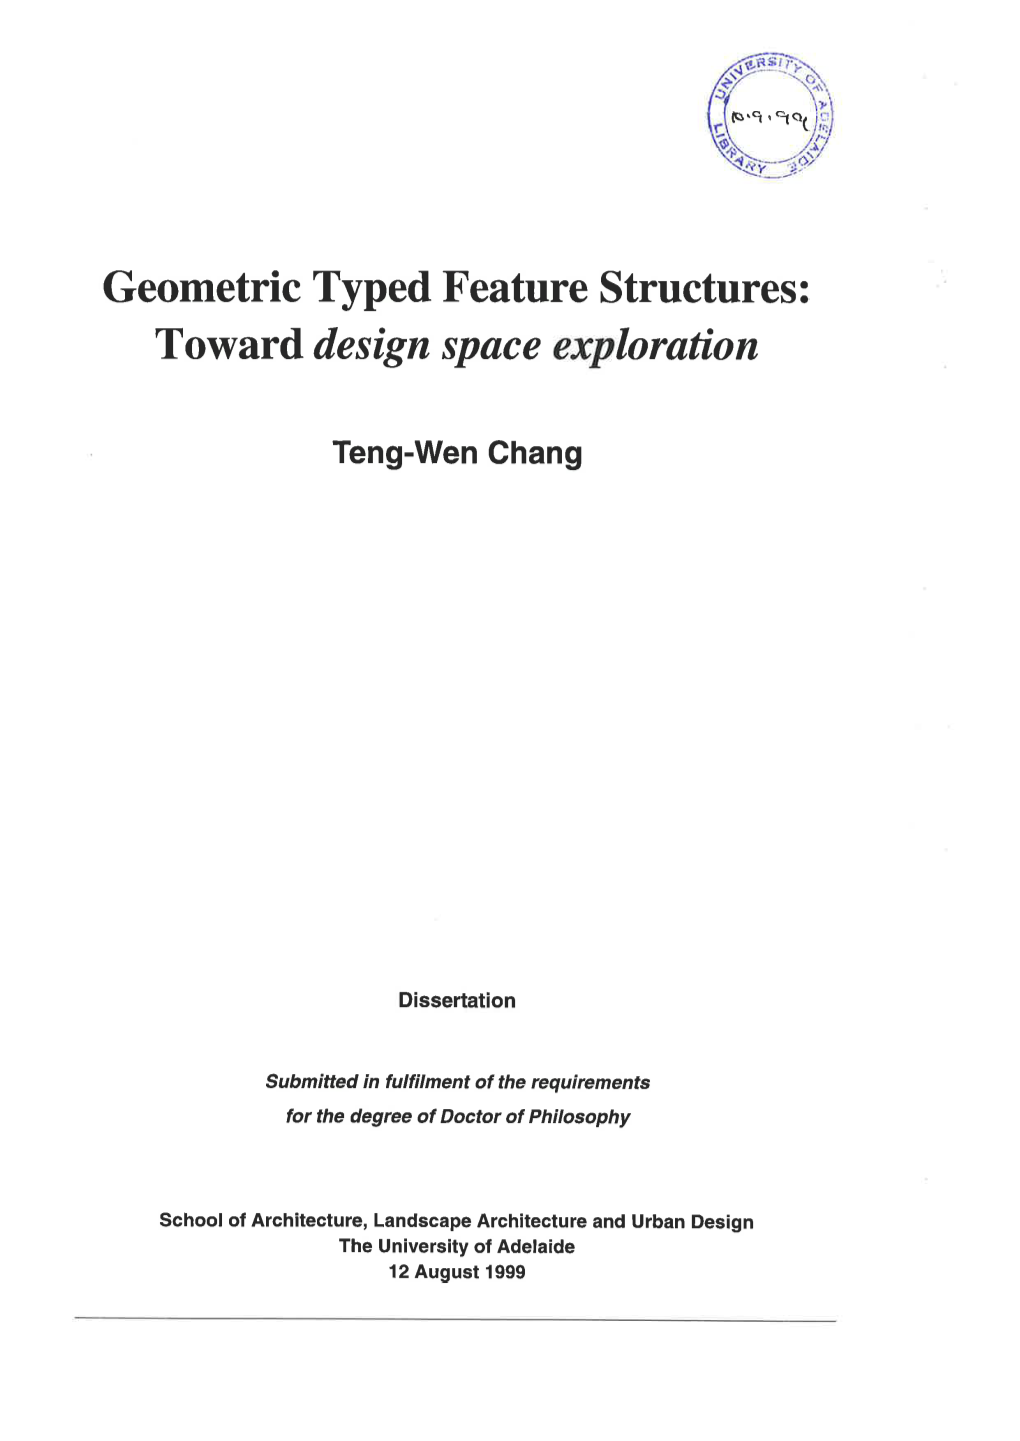 Geometric Typed Feature Structures: Toward Design Space Exploration